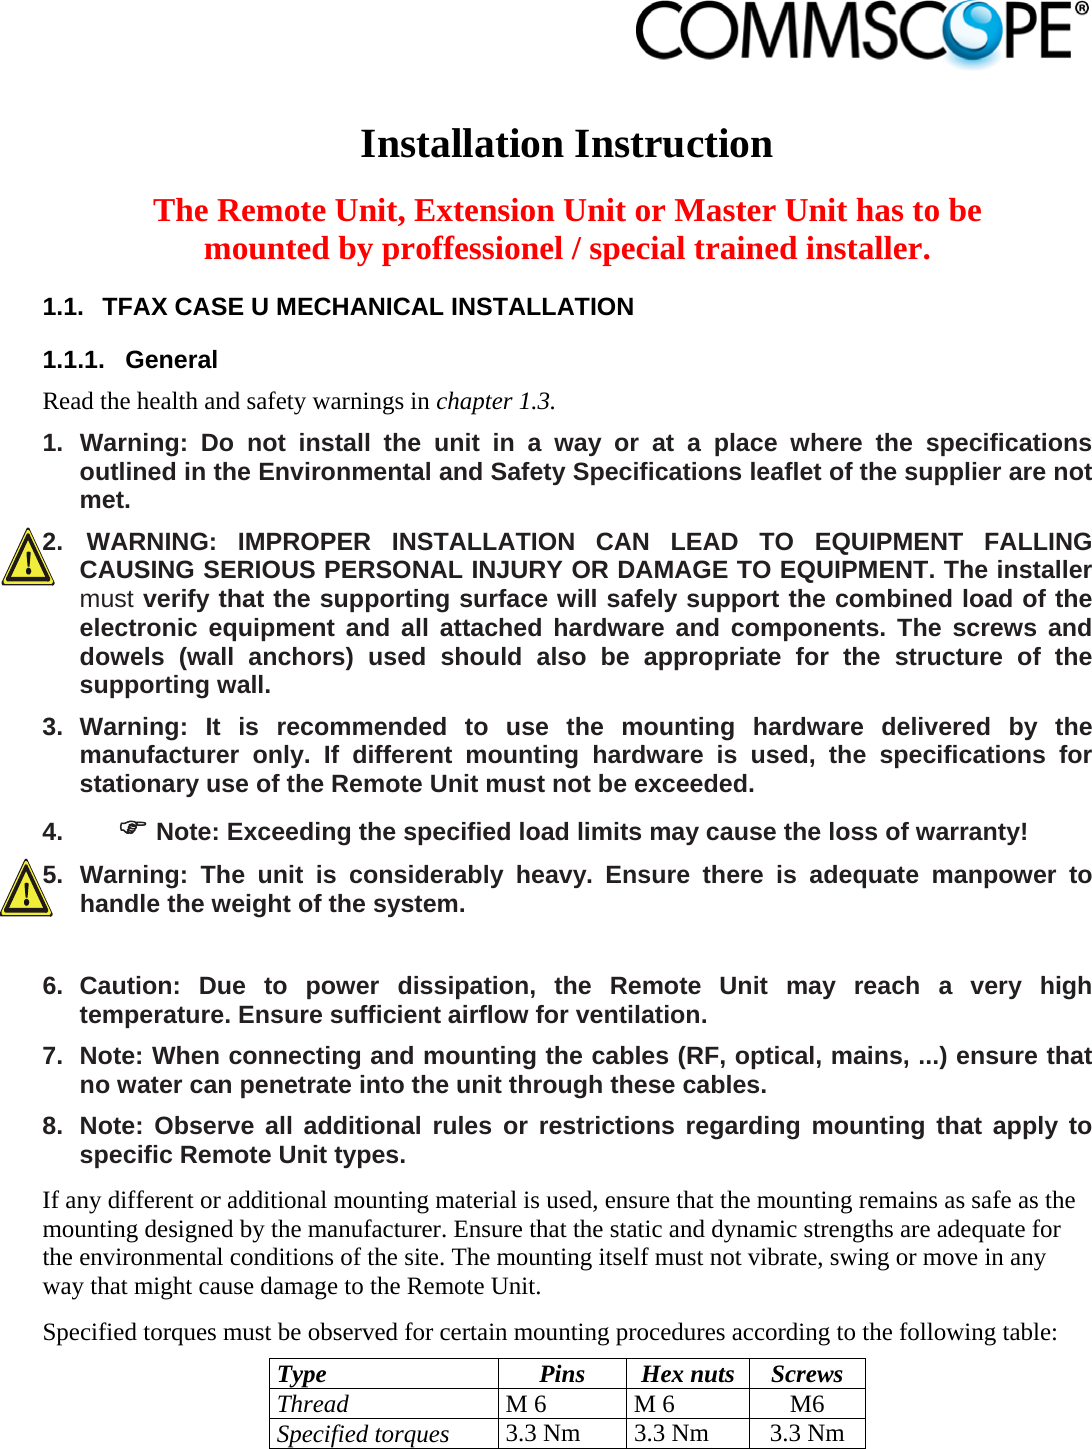                             Installation Instruction  The Remote Unit, Extension Unit or Master Unit has to be mounted by proffessionel / special trained installer. 1.1.  TFAX CASE U MECHANICAL INSTALLATION  1.1.1. General Read the health and safety warnings in chapter 1.3. 1. Warning: Do not install the unit in a way or at a place where the specifications outlined in the Environmental and Safety Specifications leaflet of the supplier are not met. 2.   WARNING: IMPROPER INSTALLATION CAN LEAD TO EQUIPMENT FALLING CAUSING SERIOUS PERSONAL INJURY OR DAMAGE TO EQUIPMENT. The installer must verify that the supporting surface will safely support the combined load of the electronic equipment and all attached hardware and components. The screws and dowels (wall anchors) used should also be appropriate for the structure of the supporting wall. 3. Warning: It is recommended to use the mounting hardware delivered by the manufacturer only. If different mounting hardware is used, the specifications for stationary use of the Remote Unit must not be exceeded. 4.   Note: Exceeding the specified load limits may cause the loss of warranty! 5. Warning: The unit is considerably heavy. Ensure there is adequate manpower to handle the weight of the system.  6. Caution: Due to power dissipation, the Remote Unit may reach a very high temperature. Ensure sufficient airflow for ventilation. 7.  Note: When connecting and mounting the cables (RF, optical, mains, ...) ensure that no water can penetrate into the unit through these cables. 8.  Note: Observe all additional rules or restrictions regarding mounting that apply to specific Remote Unit types. If any different or additional mounting material is used, ensure that the mounting remains as safe as the mounting designed by the manufacturer. Ensure that the static and dynamic strengths are adequate for the environmental conditions of the site. The mounting itself must not vibrate, swing or move in any way that might cause damage to the Remote Unit. Specified torques must be observed for certain mounting procedures according to the following table: Type Pins Hex nuts Screws Thread M 6  M 6  M6 Specified torques 3.3 Nm  3.3 Nm  3.3 Nm  